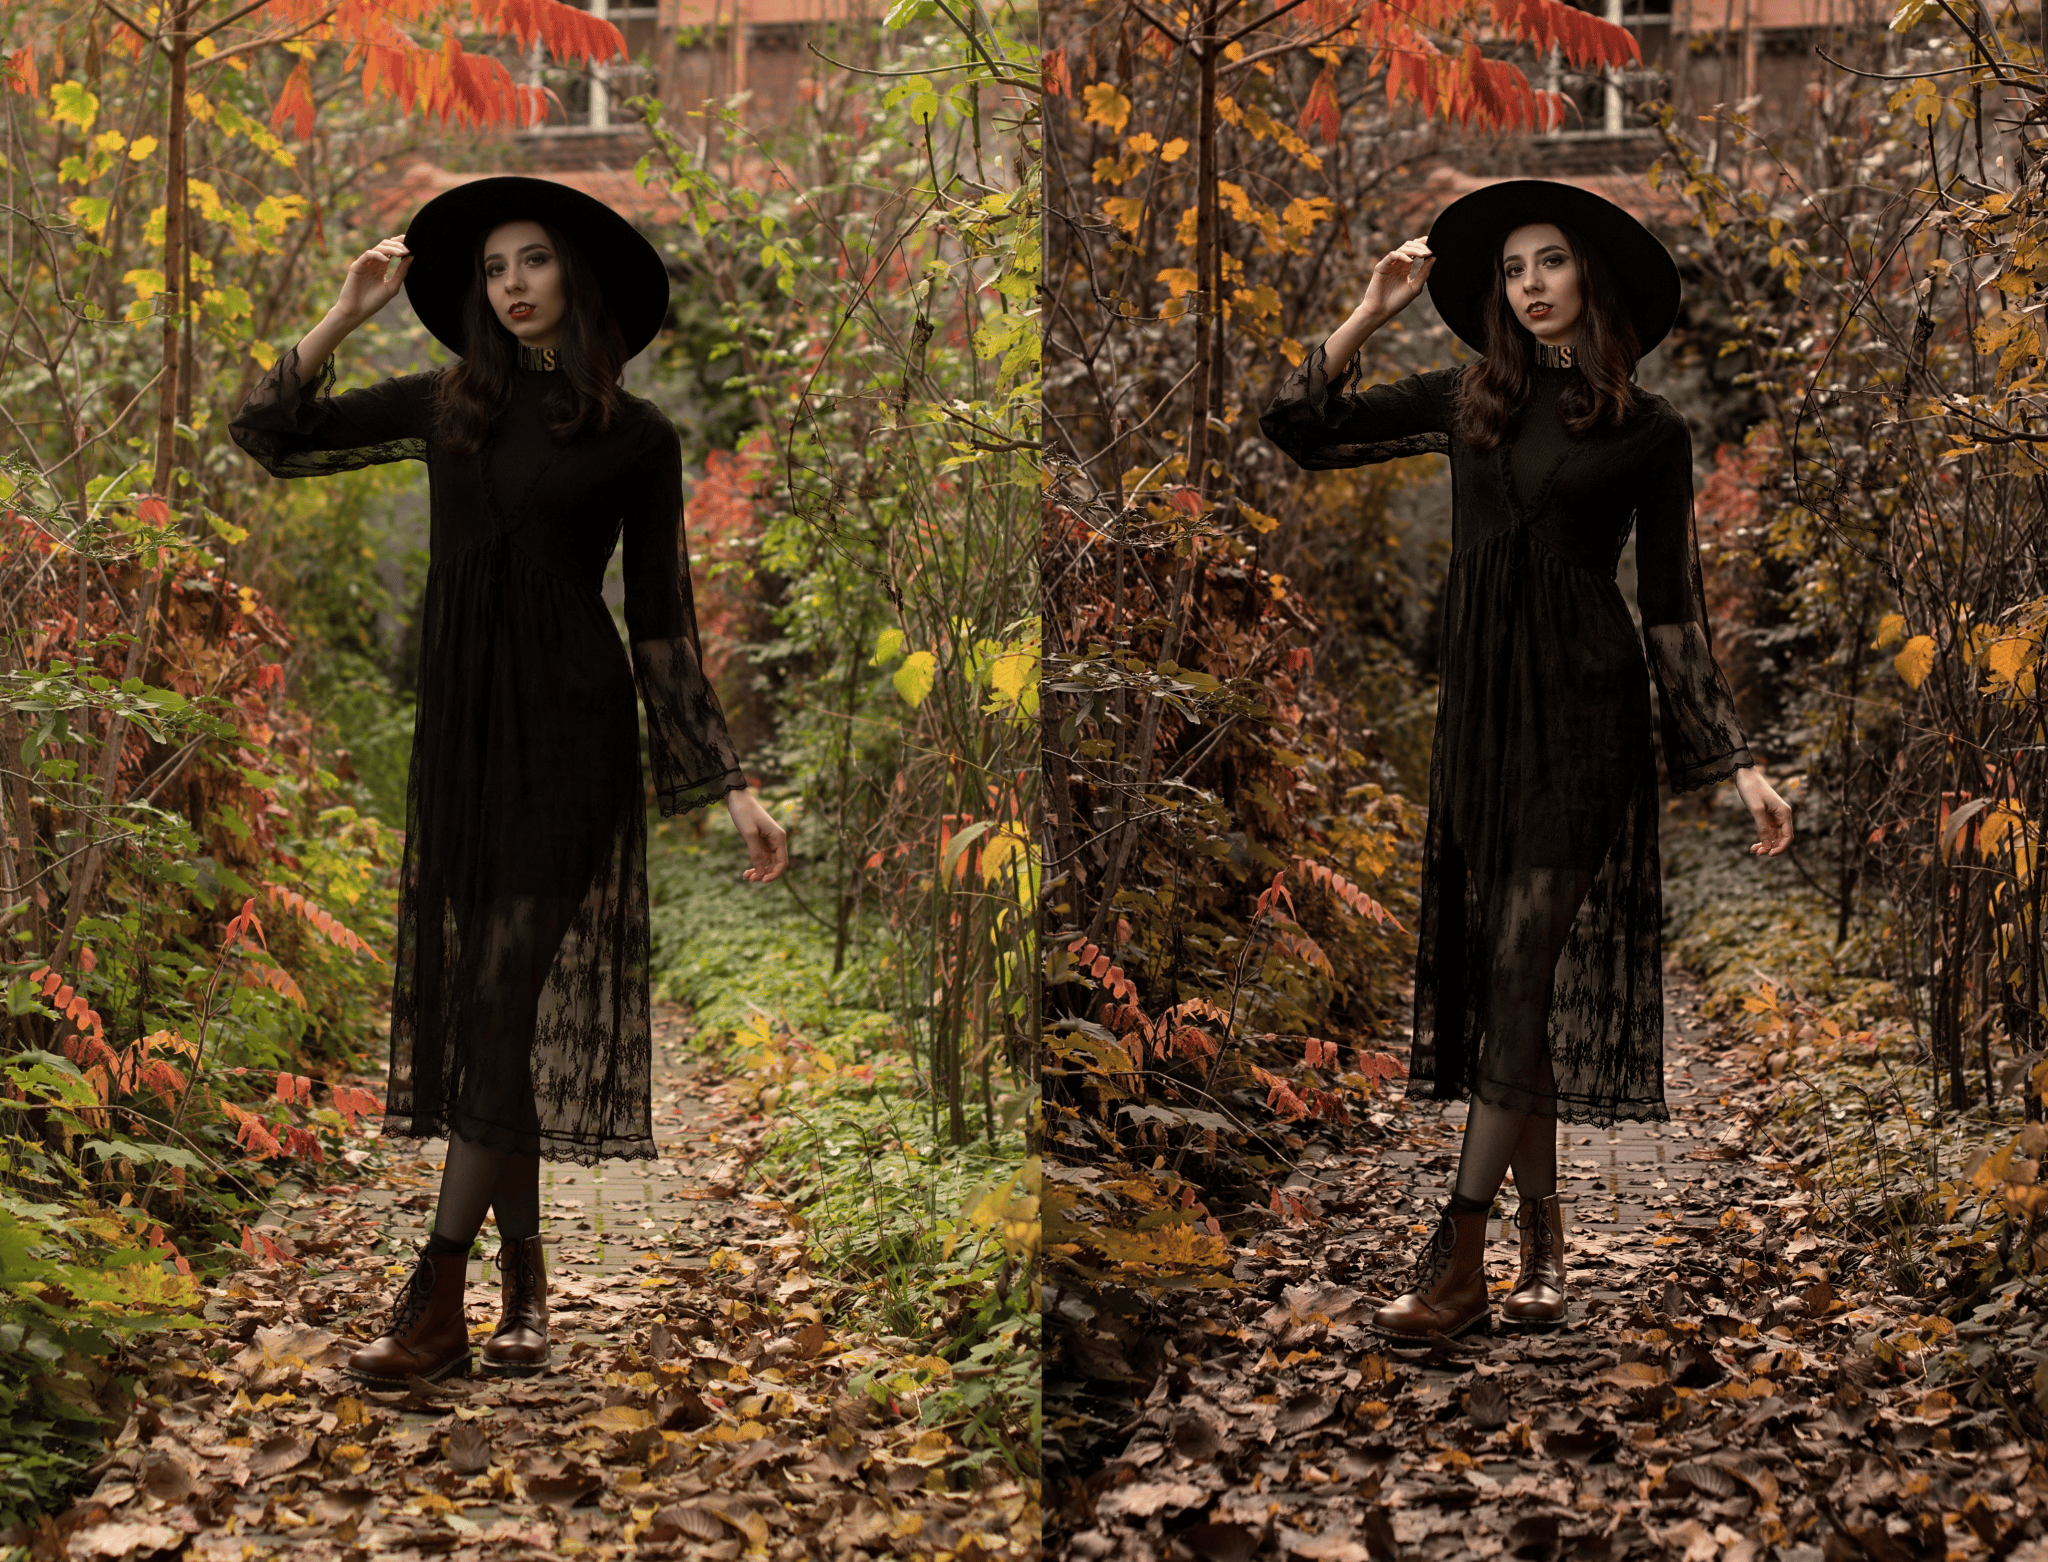 Developing an Autumn Portrait Step by Step - comparing color tones